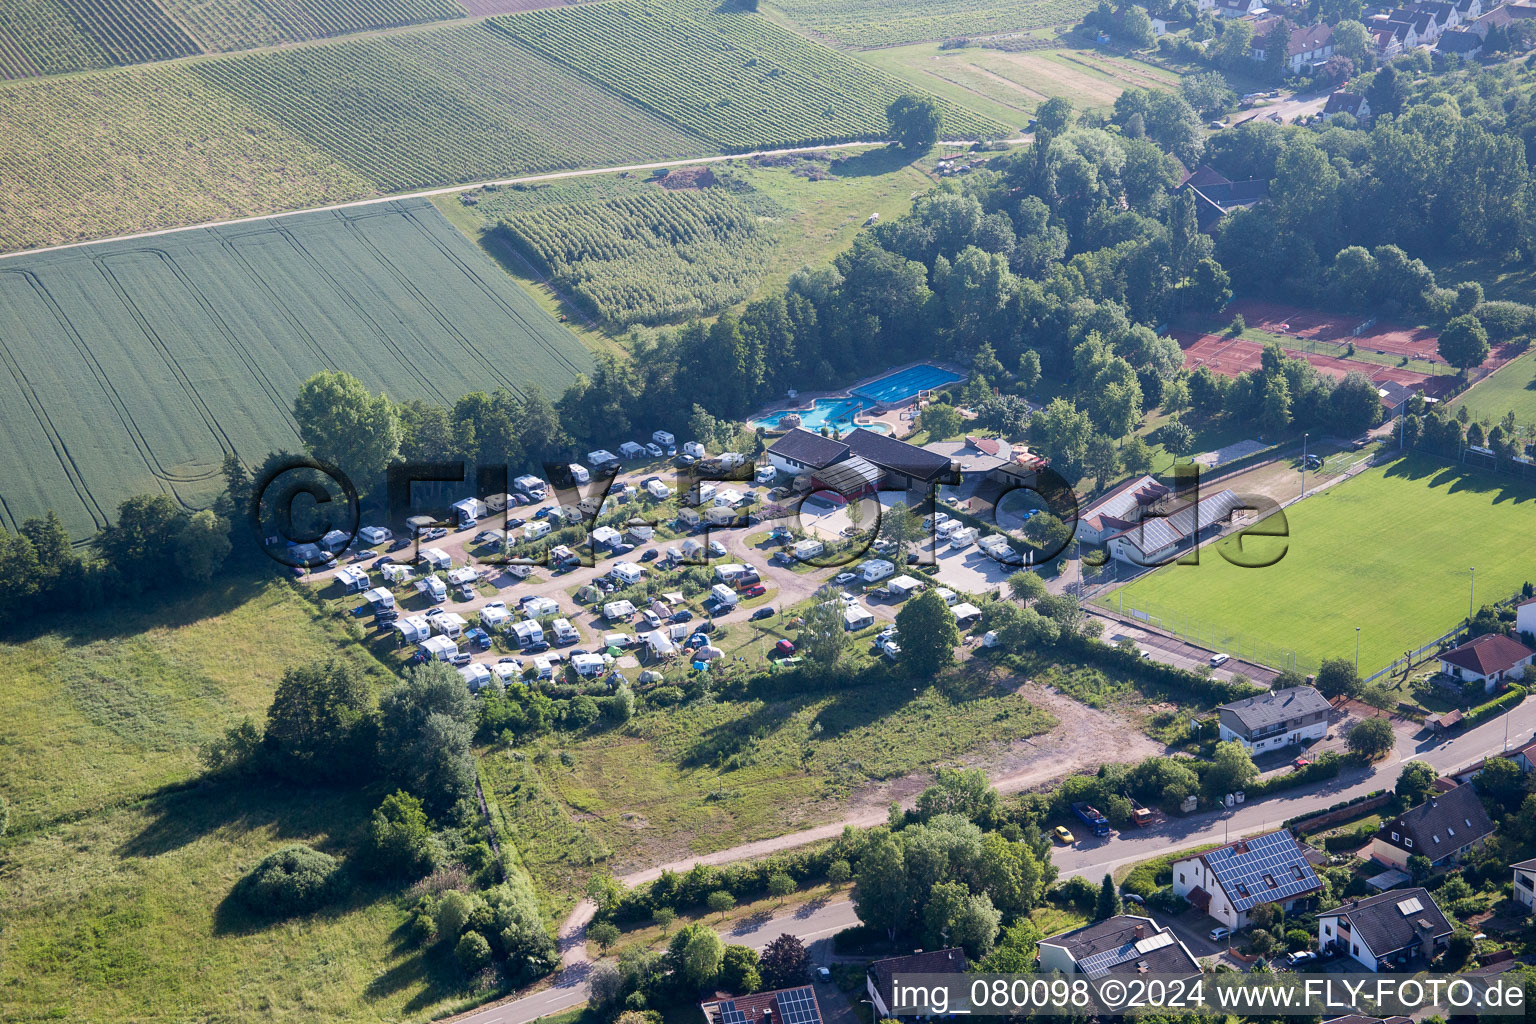 Aerial view of Camping with caravans and tents in the district Ingenheim in Billigheim-Ingenheim in the state Rhineland-Palatinate